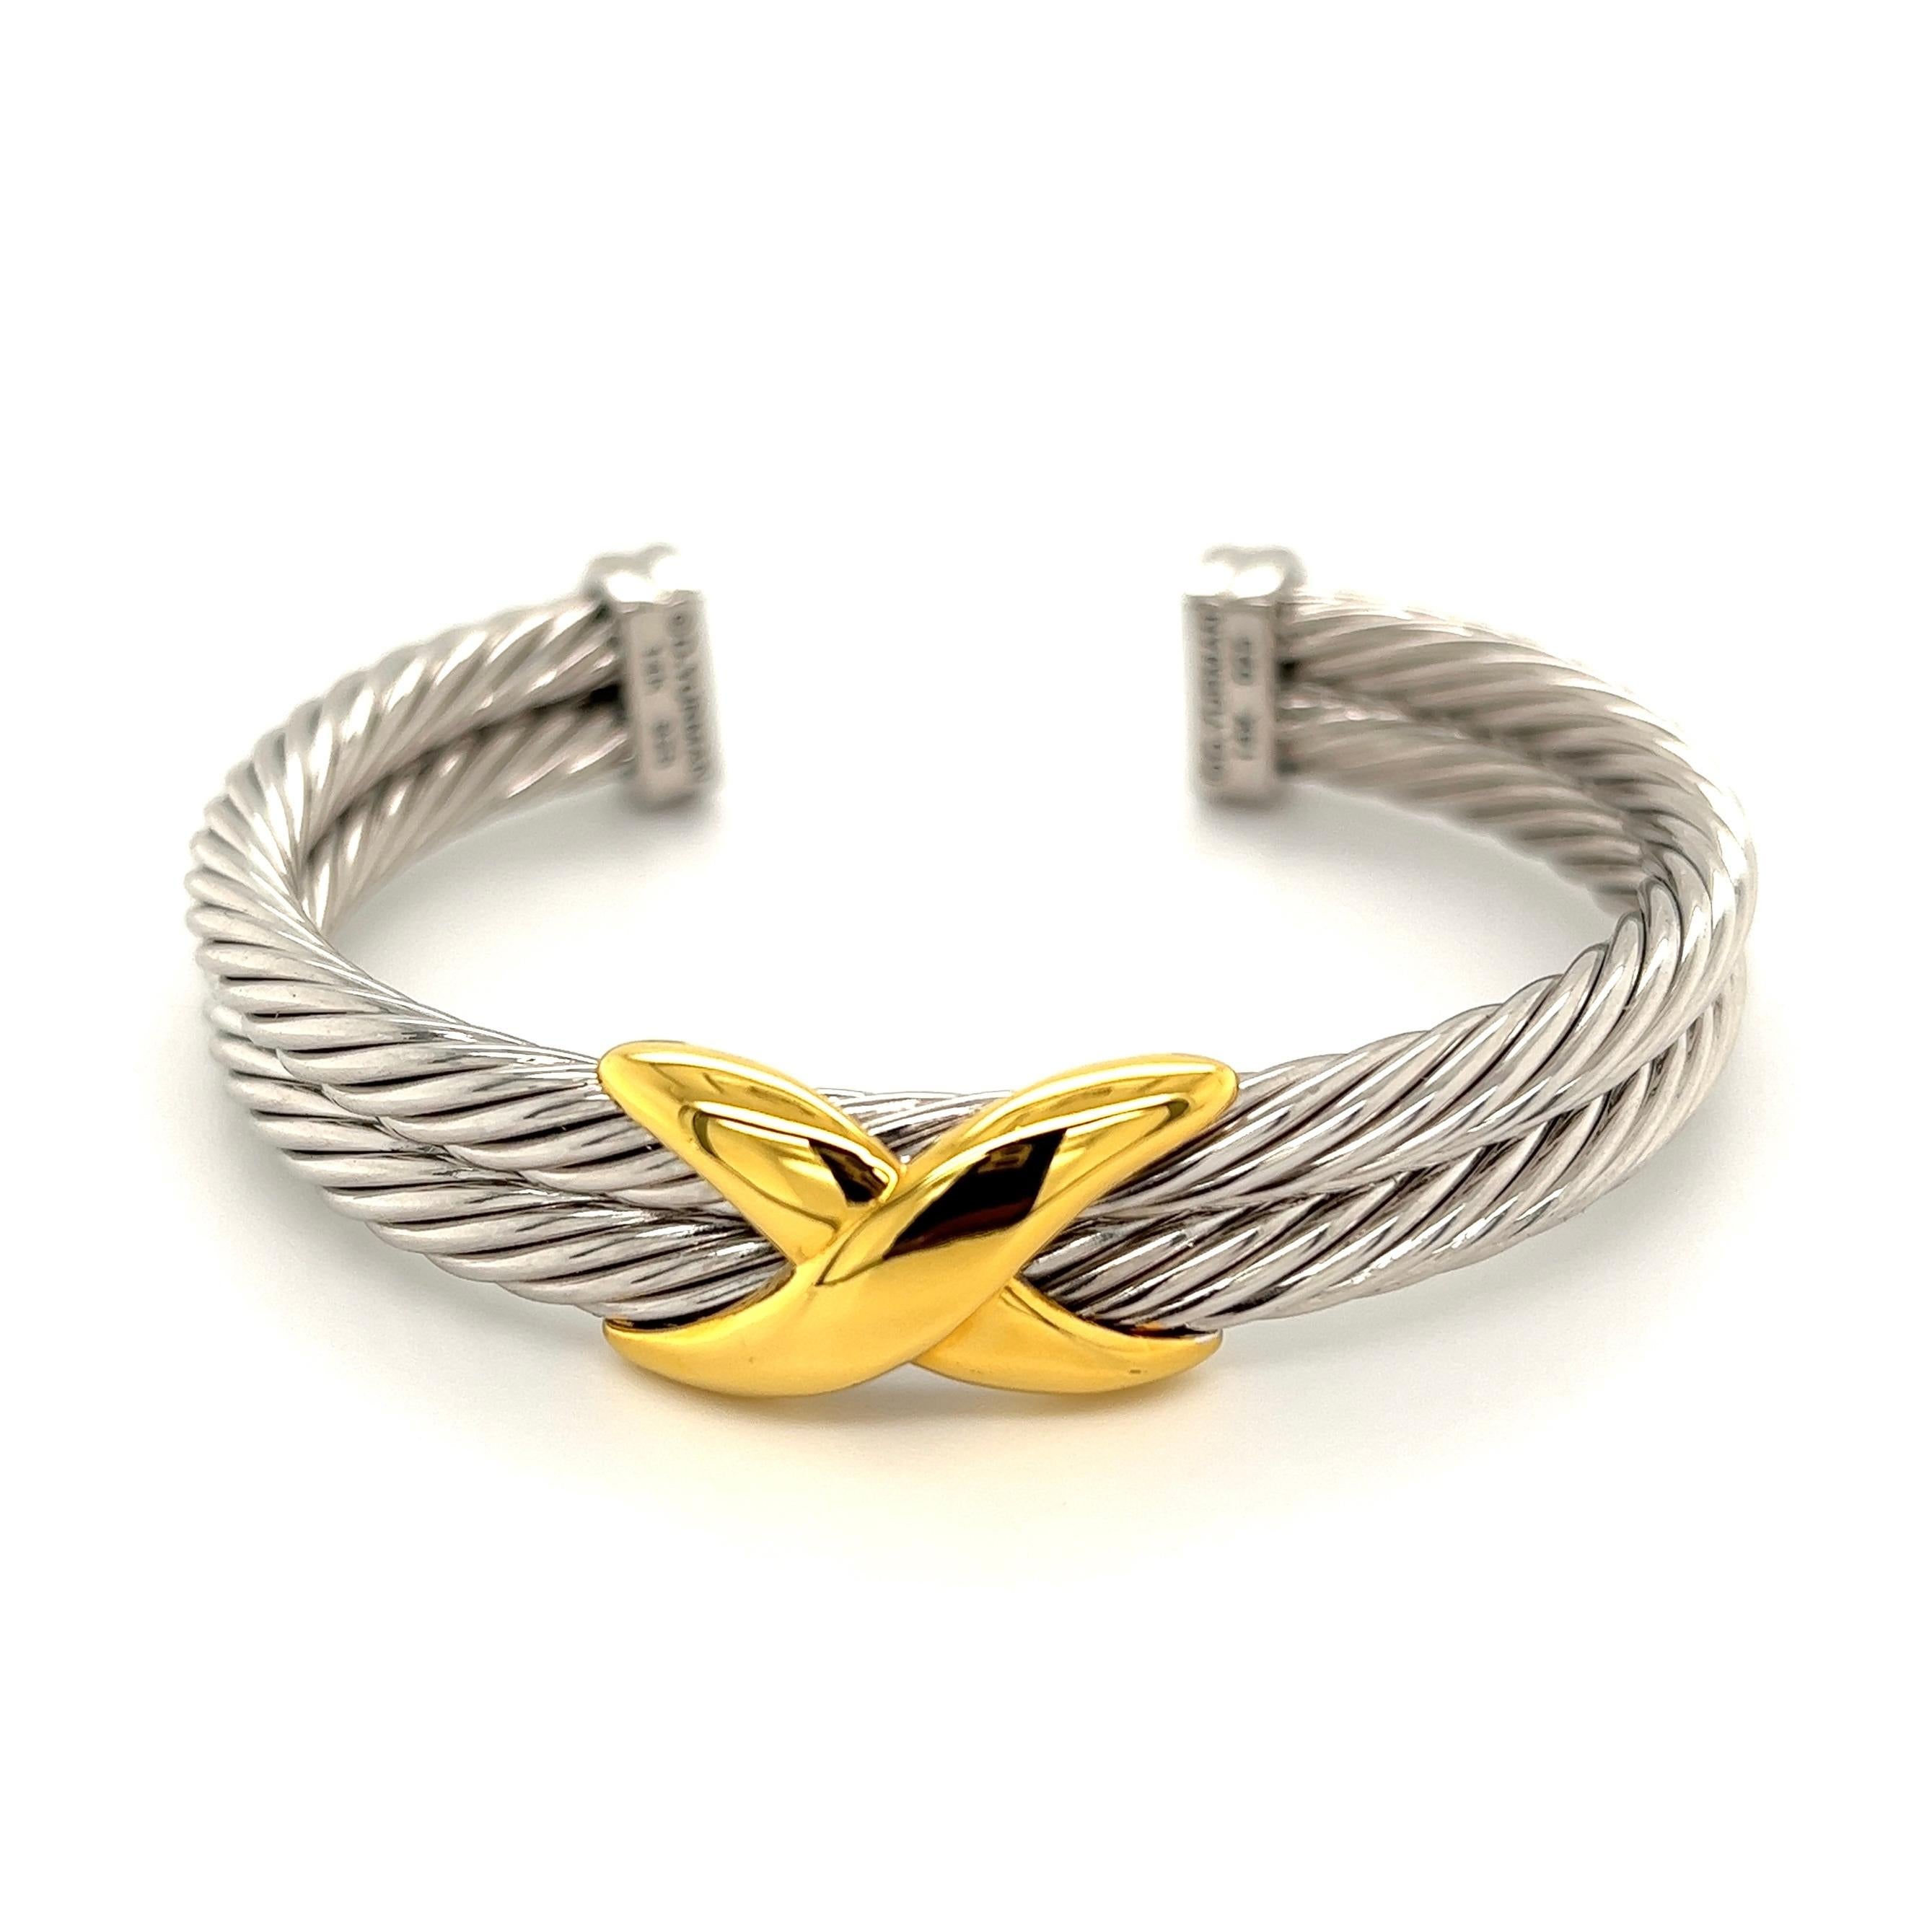 Iconic David Yurman Gold and Sterling Silver Double Cable X Cuff Bangle Bracelet. Hand crafted in 14K Yellow Gold and Sterling Silver. Opening for convenient slipping off and on. Chic and Stylish…A sure to be admired Striking and Classic Fashion